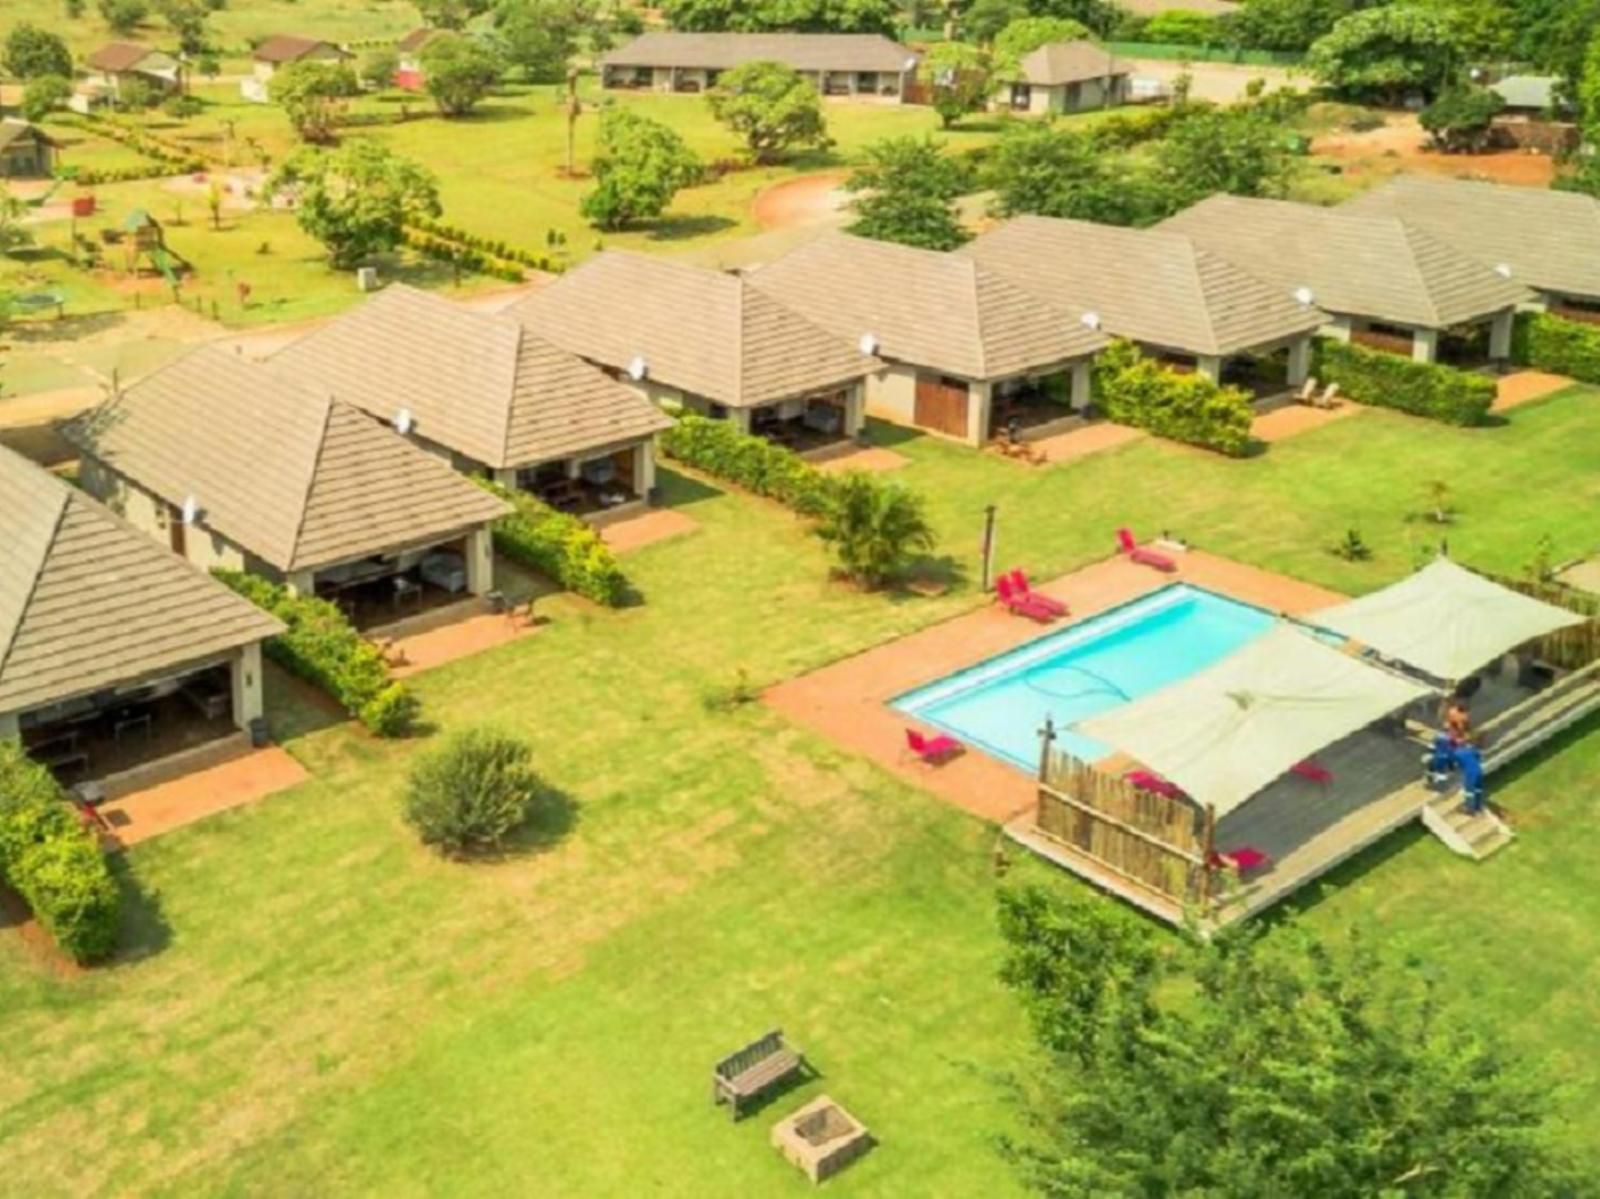 Kruger View Chalets Malelane Mpumalanga South Africa Colorful, House, Building, Architecture, Swimming Pool